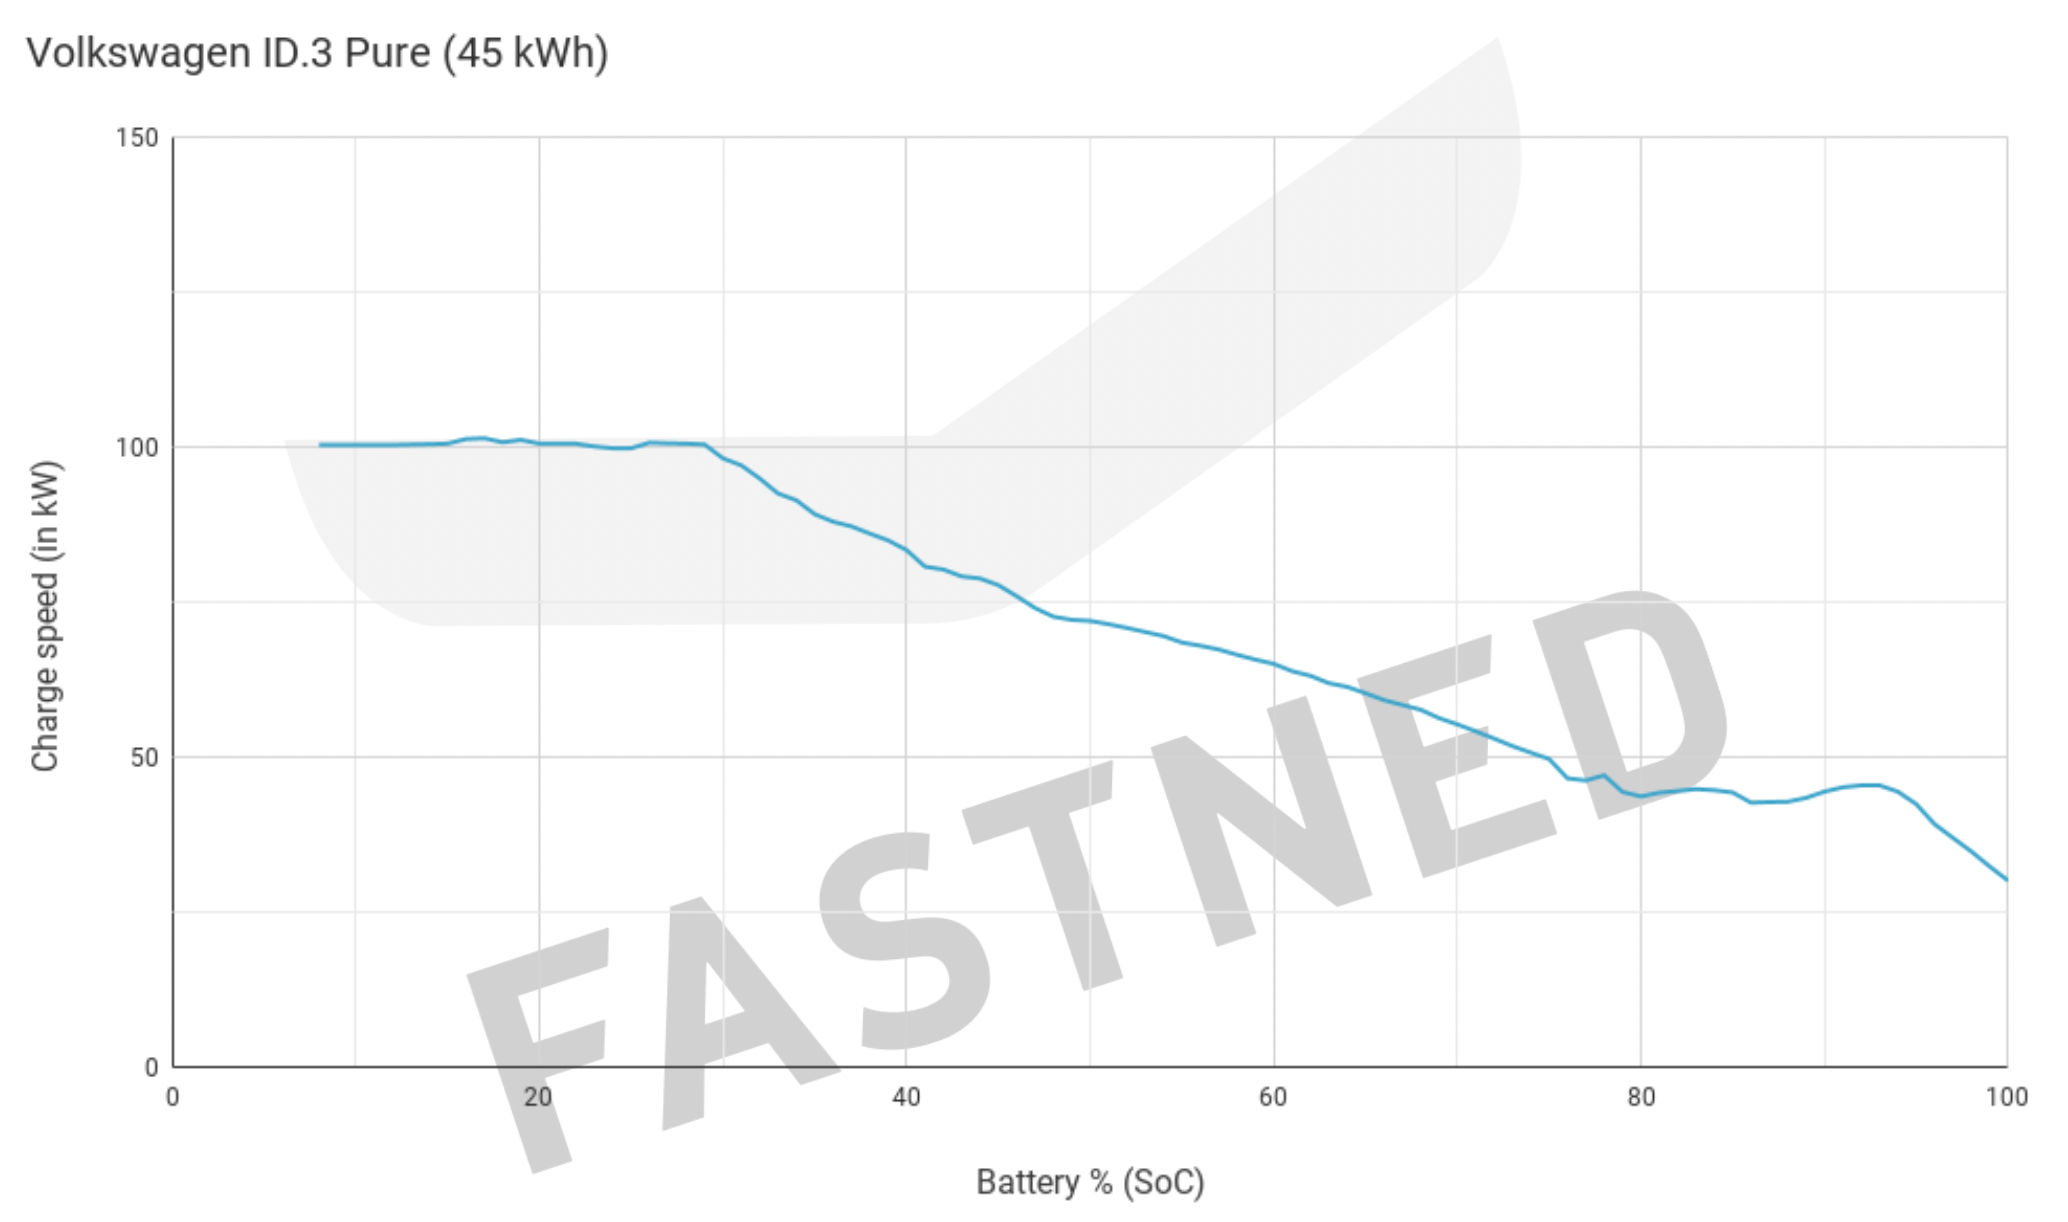 Chargecurve_Volkswagen_ID.3_Pure__45kWh__Q3_2022.png